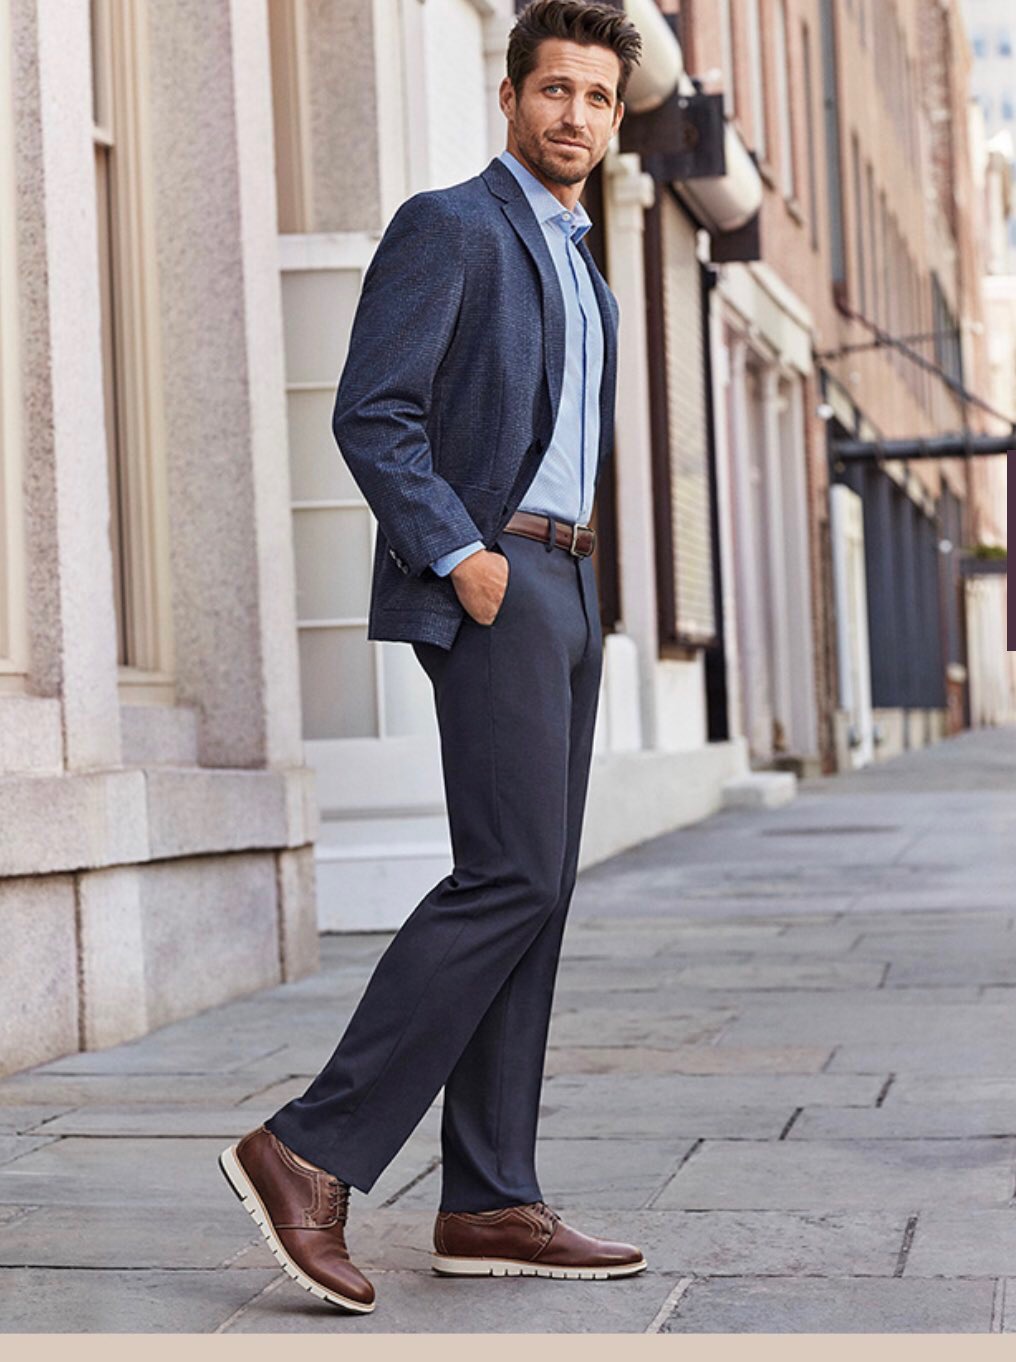 Man wearing navy suit with gray pants & loafers